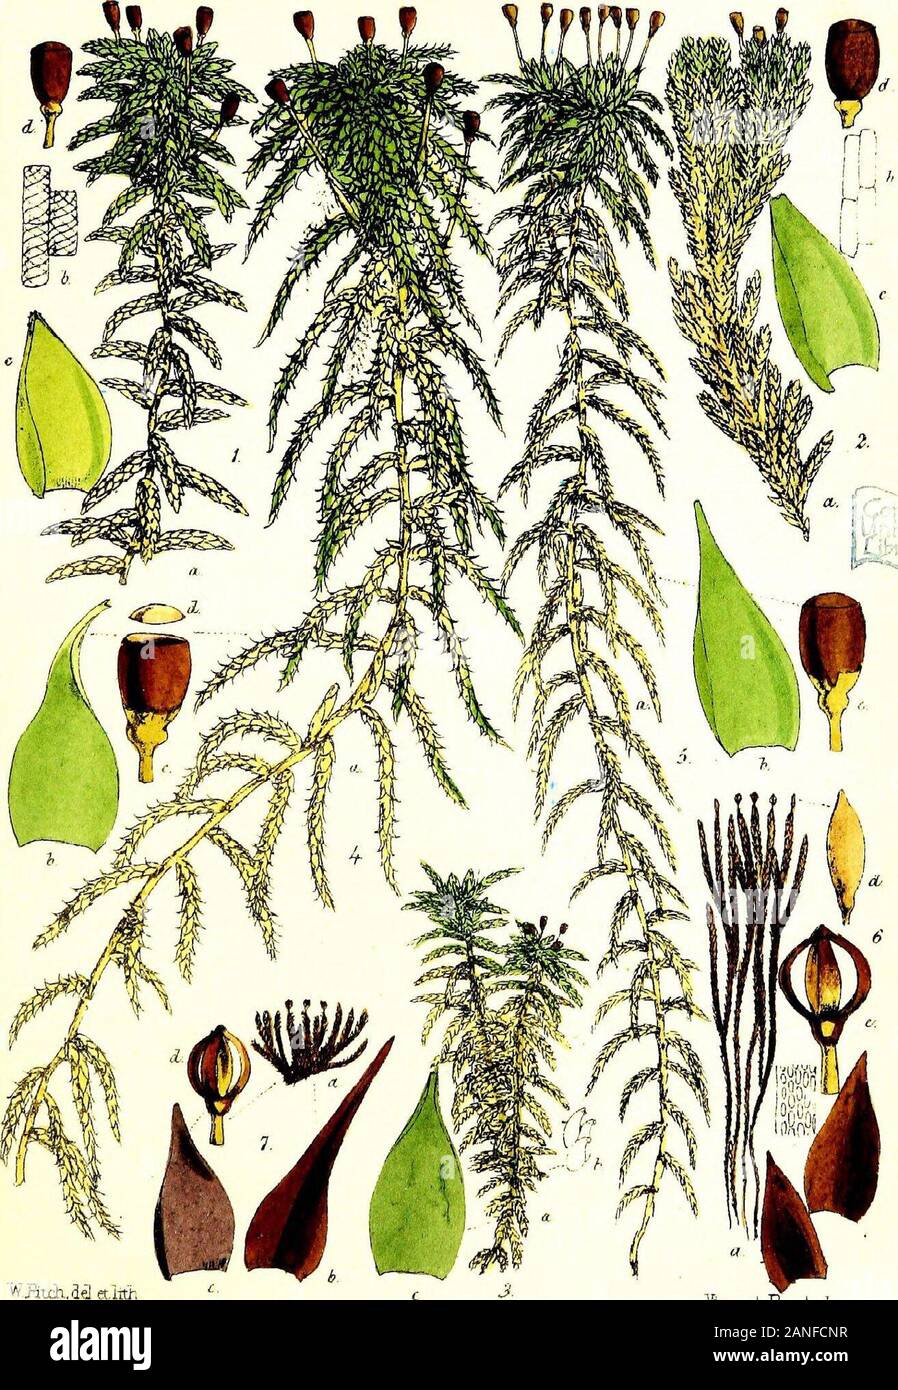 Handbook of British mosses; comprising all that are known to be natives of the British Isles . VKEtdvaelatMi. gi VmcentBroQks.Iirip. PLATE II. 1. Sphagnum cymbifolium. a. plant, nat. size. b. cells from stem, magnified. c. leaf, magnified. d. sporangium. 2. S. compactum. a. plant, nat. size. b. cells from stem, magnified. c. leaf, magnified. d. sporangium. 3. S. molluscum. a. plant, nat. size. b. cells from stem, magnified. c. leaf, magnified. 4. S. acutifolium. a. plant, nat. size. b. leaf, magnified. c. sporangium with remains of veil, magnified. d. lid, magnified. 5. S. squarrosum. a. plant Stock Photo